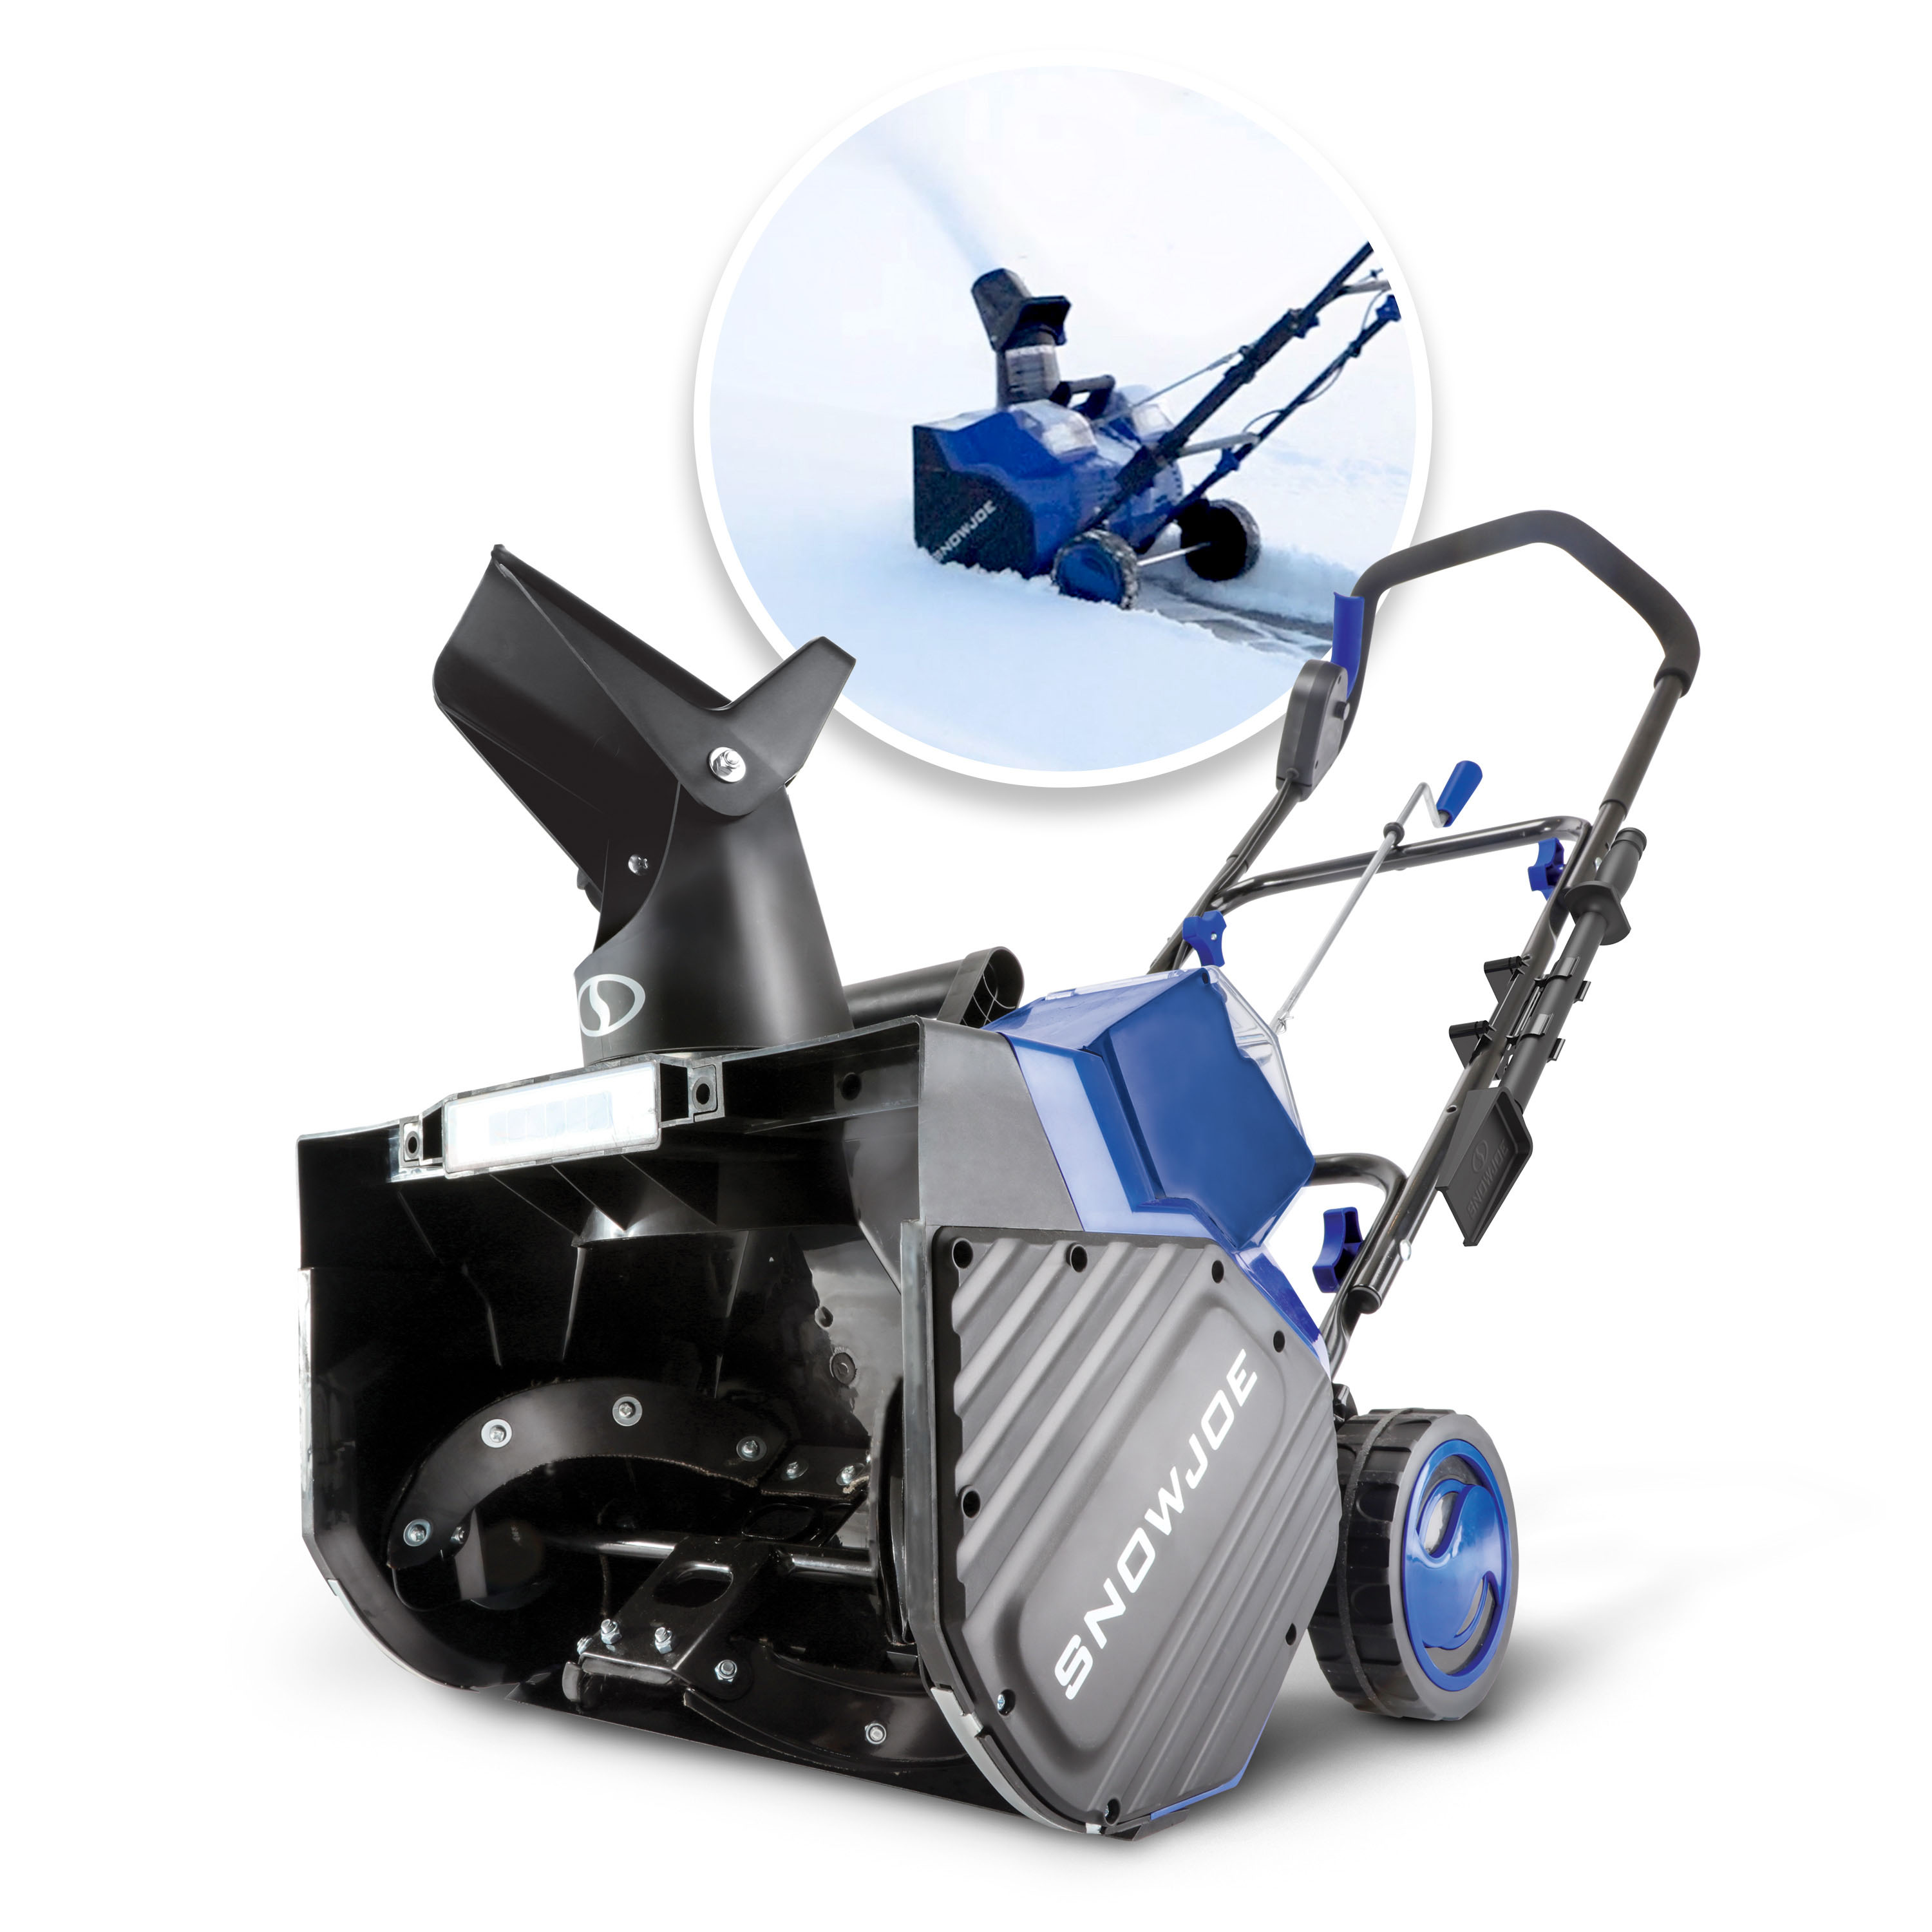 Snow Joe 48V 18-inch Single-Stage Cordless Snow Blower W/ Headlight, Brushless 1200W Motor, 2 x 4.0-Ah Batteries & Charger - image 1 of 18